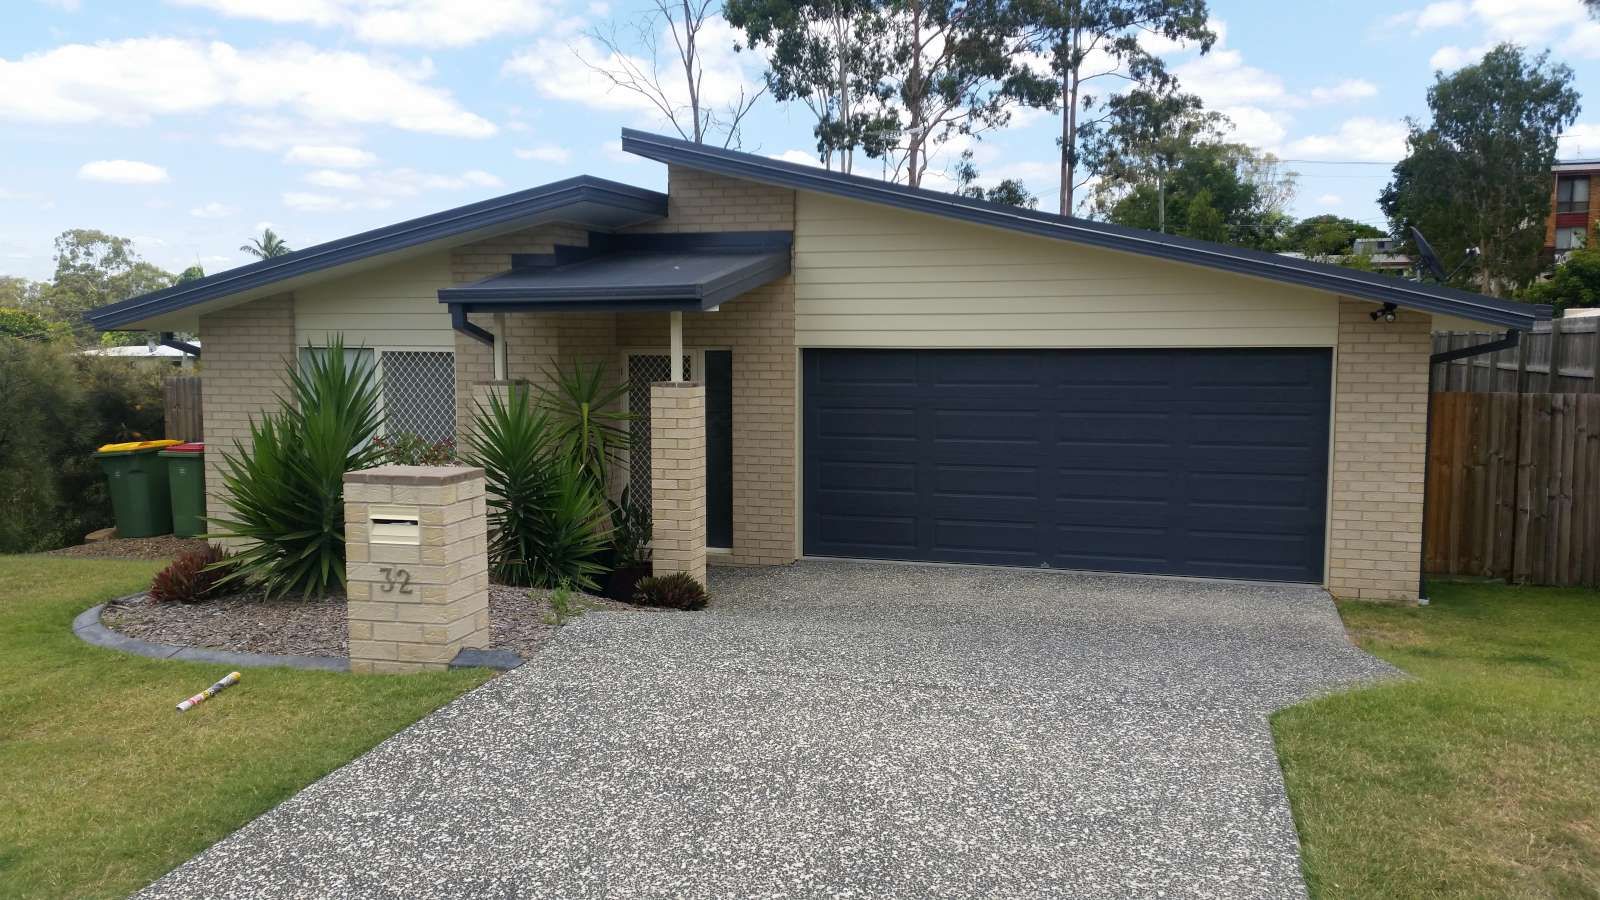 4 bedrooms House in 32 Brentwood Drive BUNDAMBA QLD, 4304